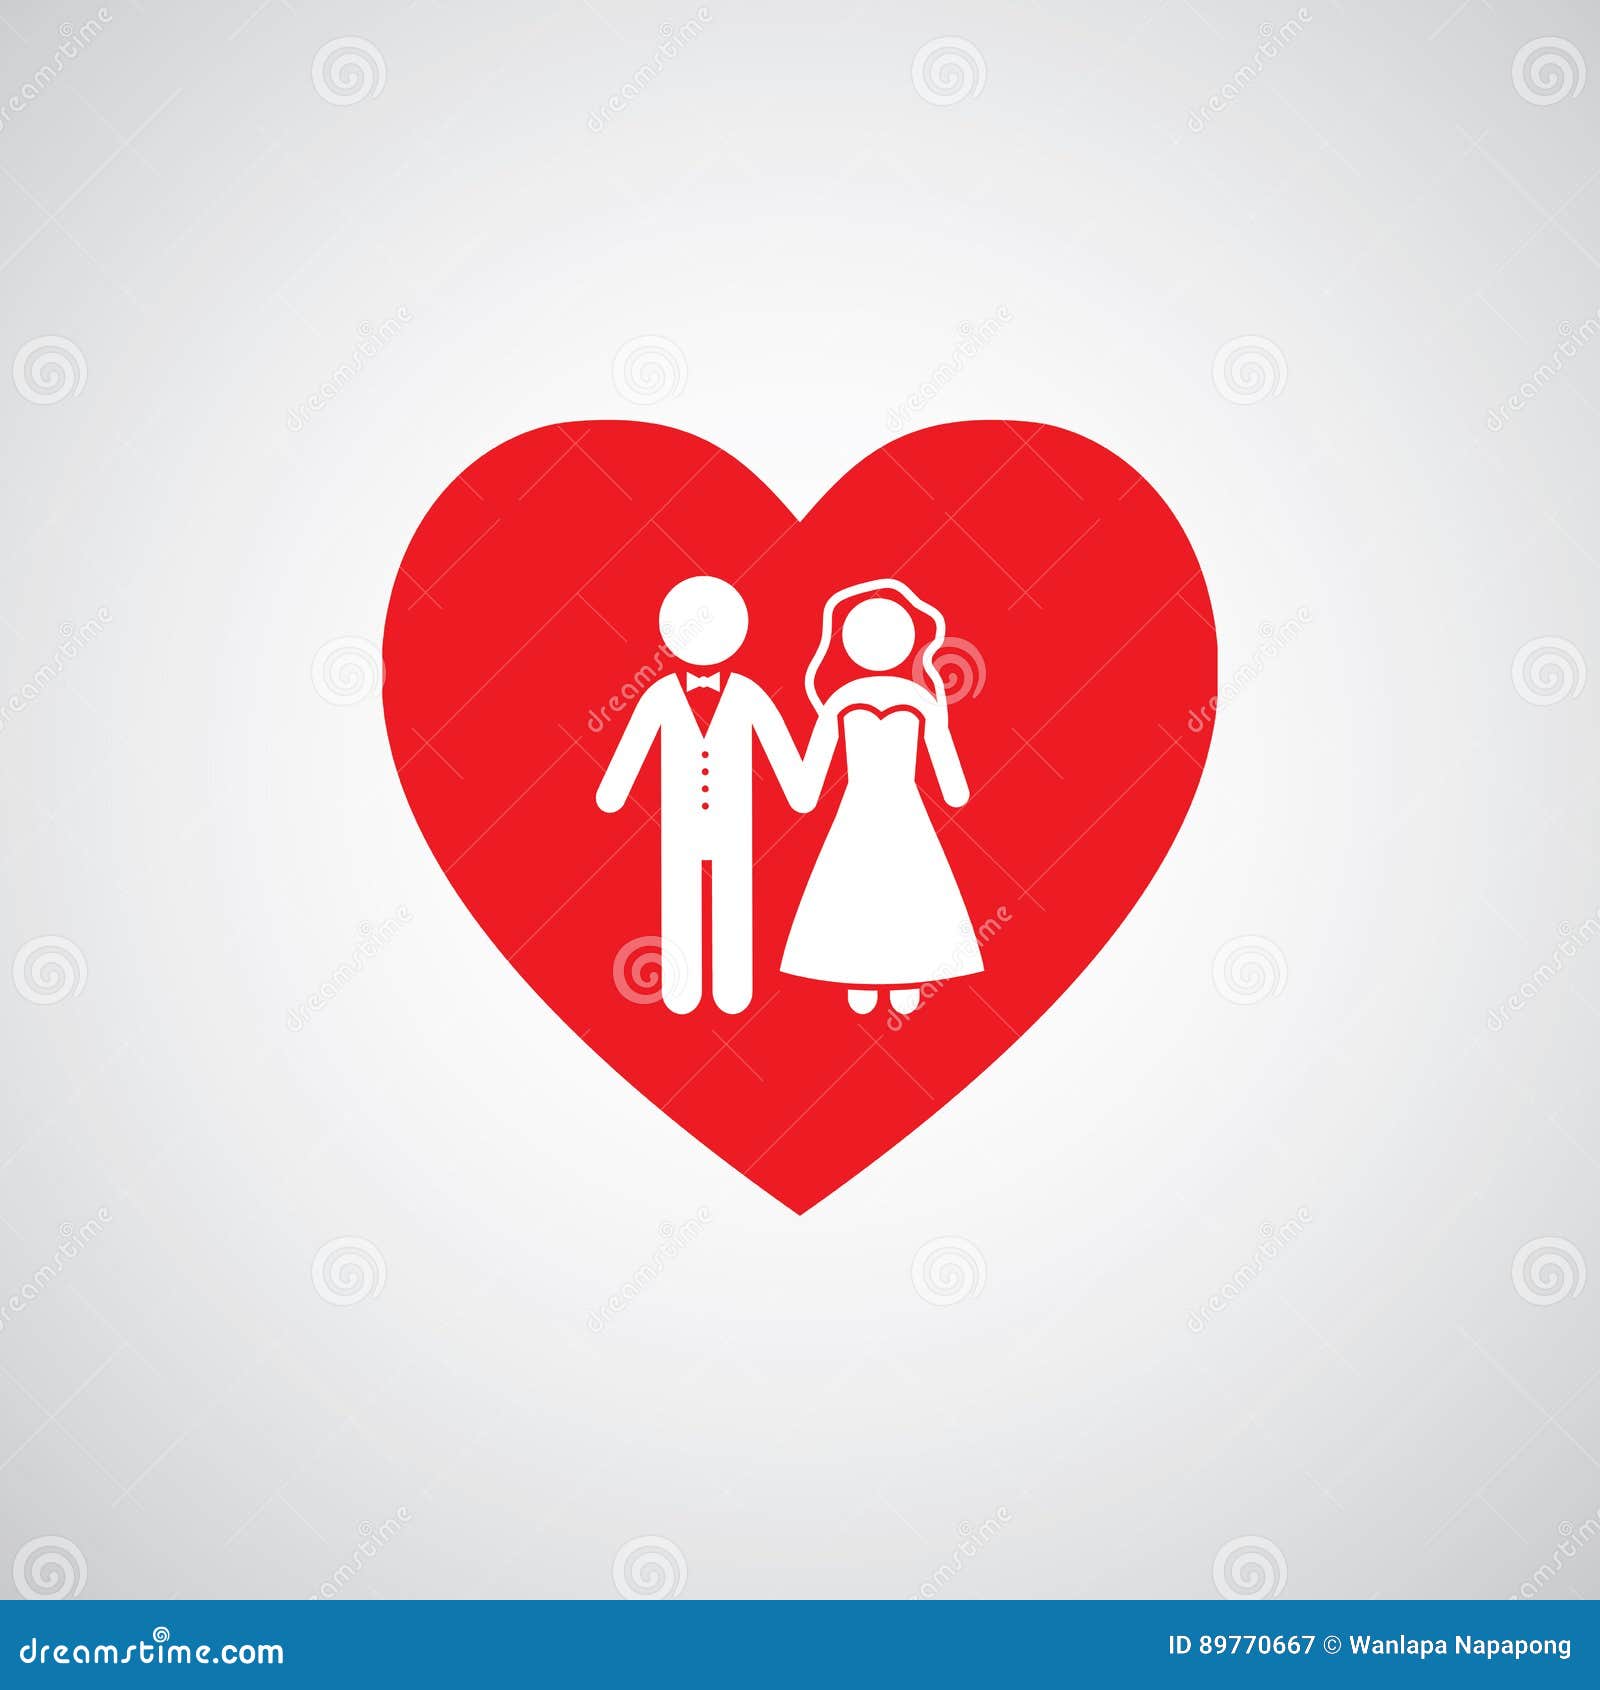 Wedding Married Couple Icon Stock Vector - Illustration of marry ...